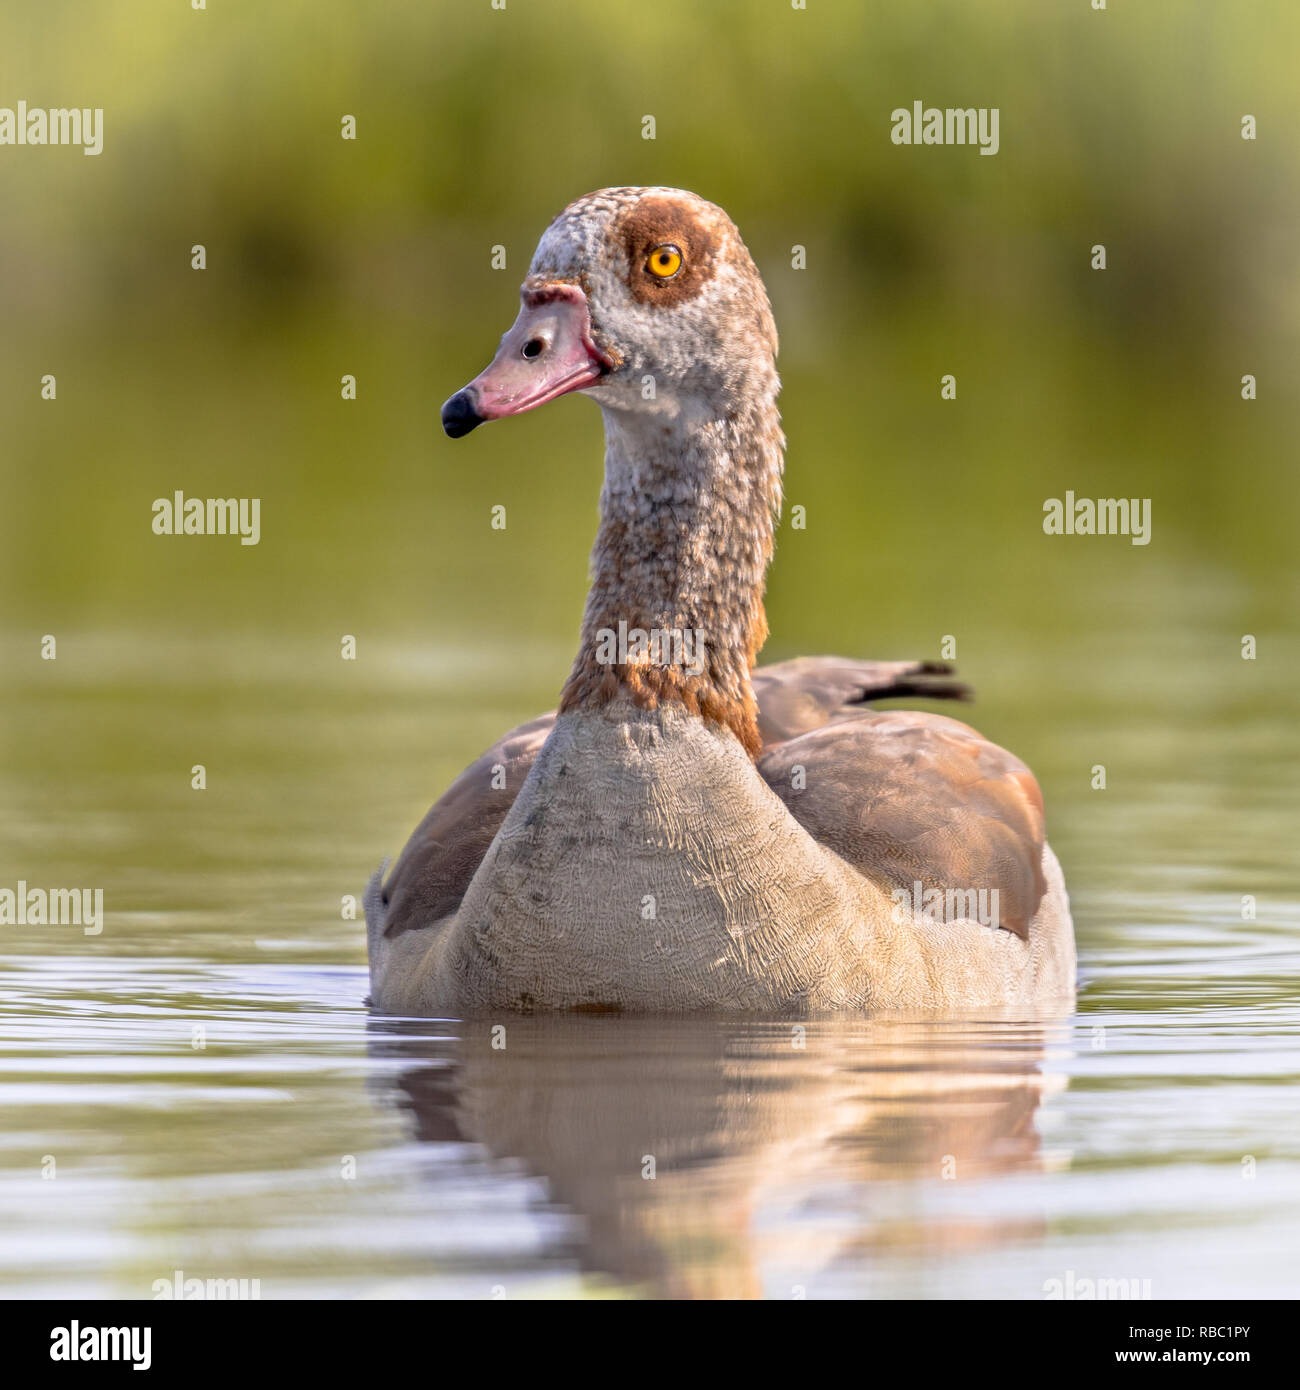 Egyptian goose (Alopochen aegyptiaca) bird swimming in shallow pond. This bird is a problematic invasive specie in much of Europe. Stock Photo